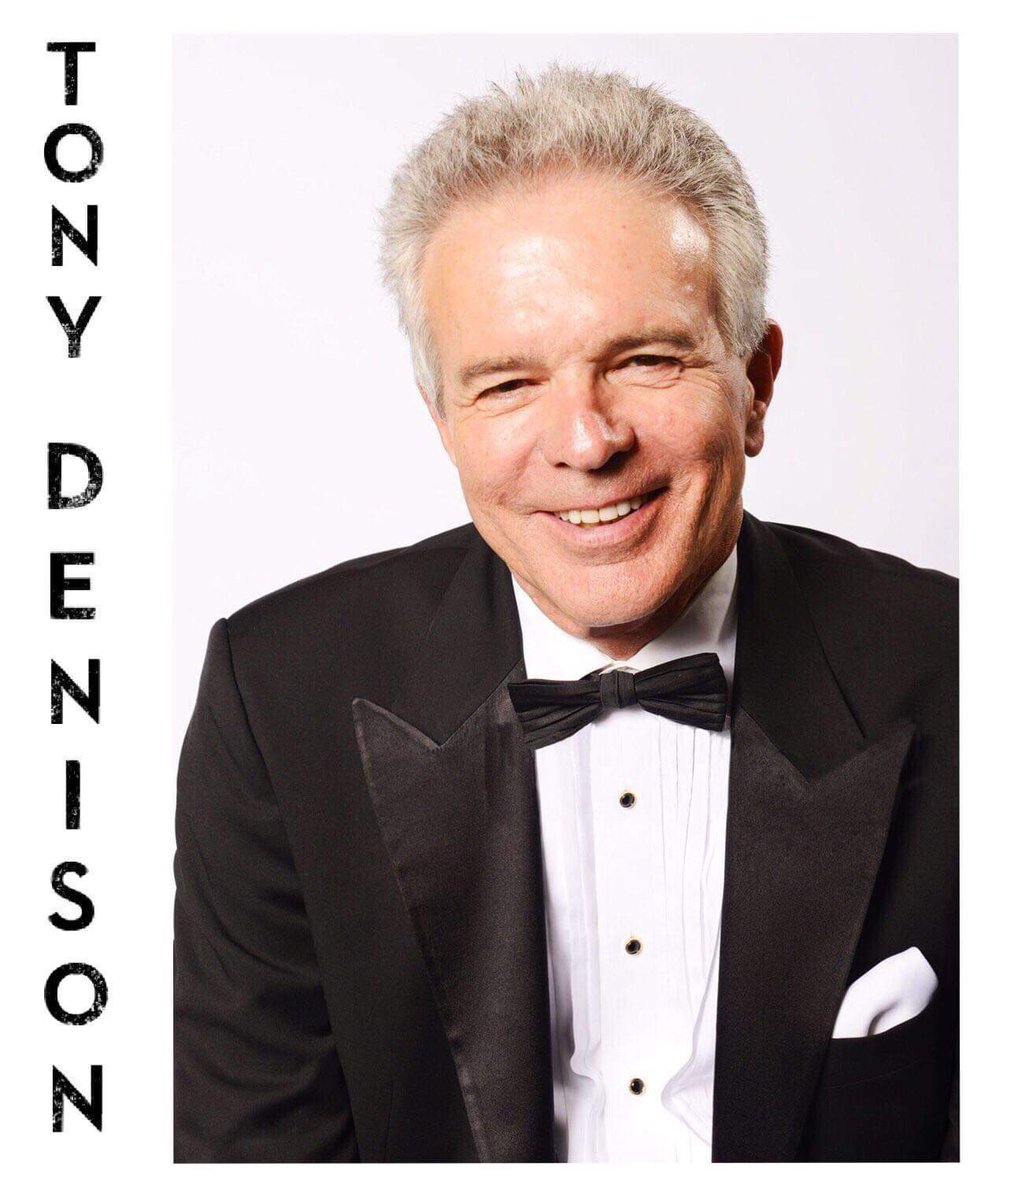 #WednesdayWow #ClassicStyle 😉😉💜💜 #SharpDressed #Our007 #TonyDenison #DDD